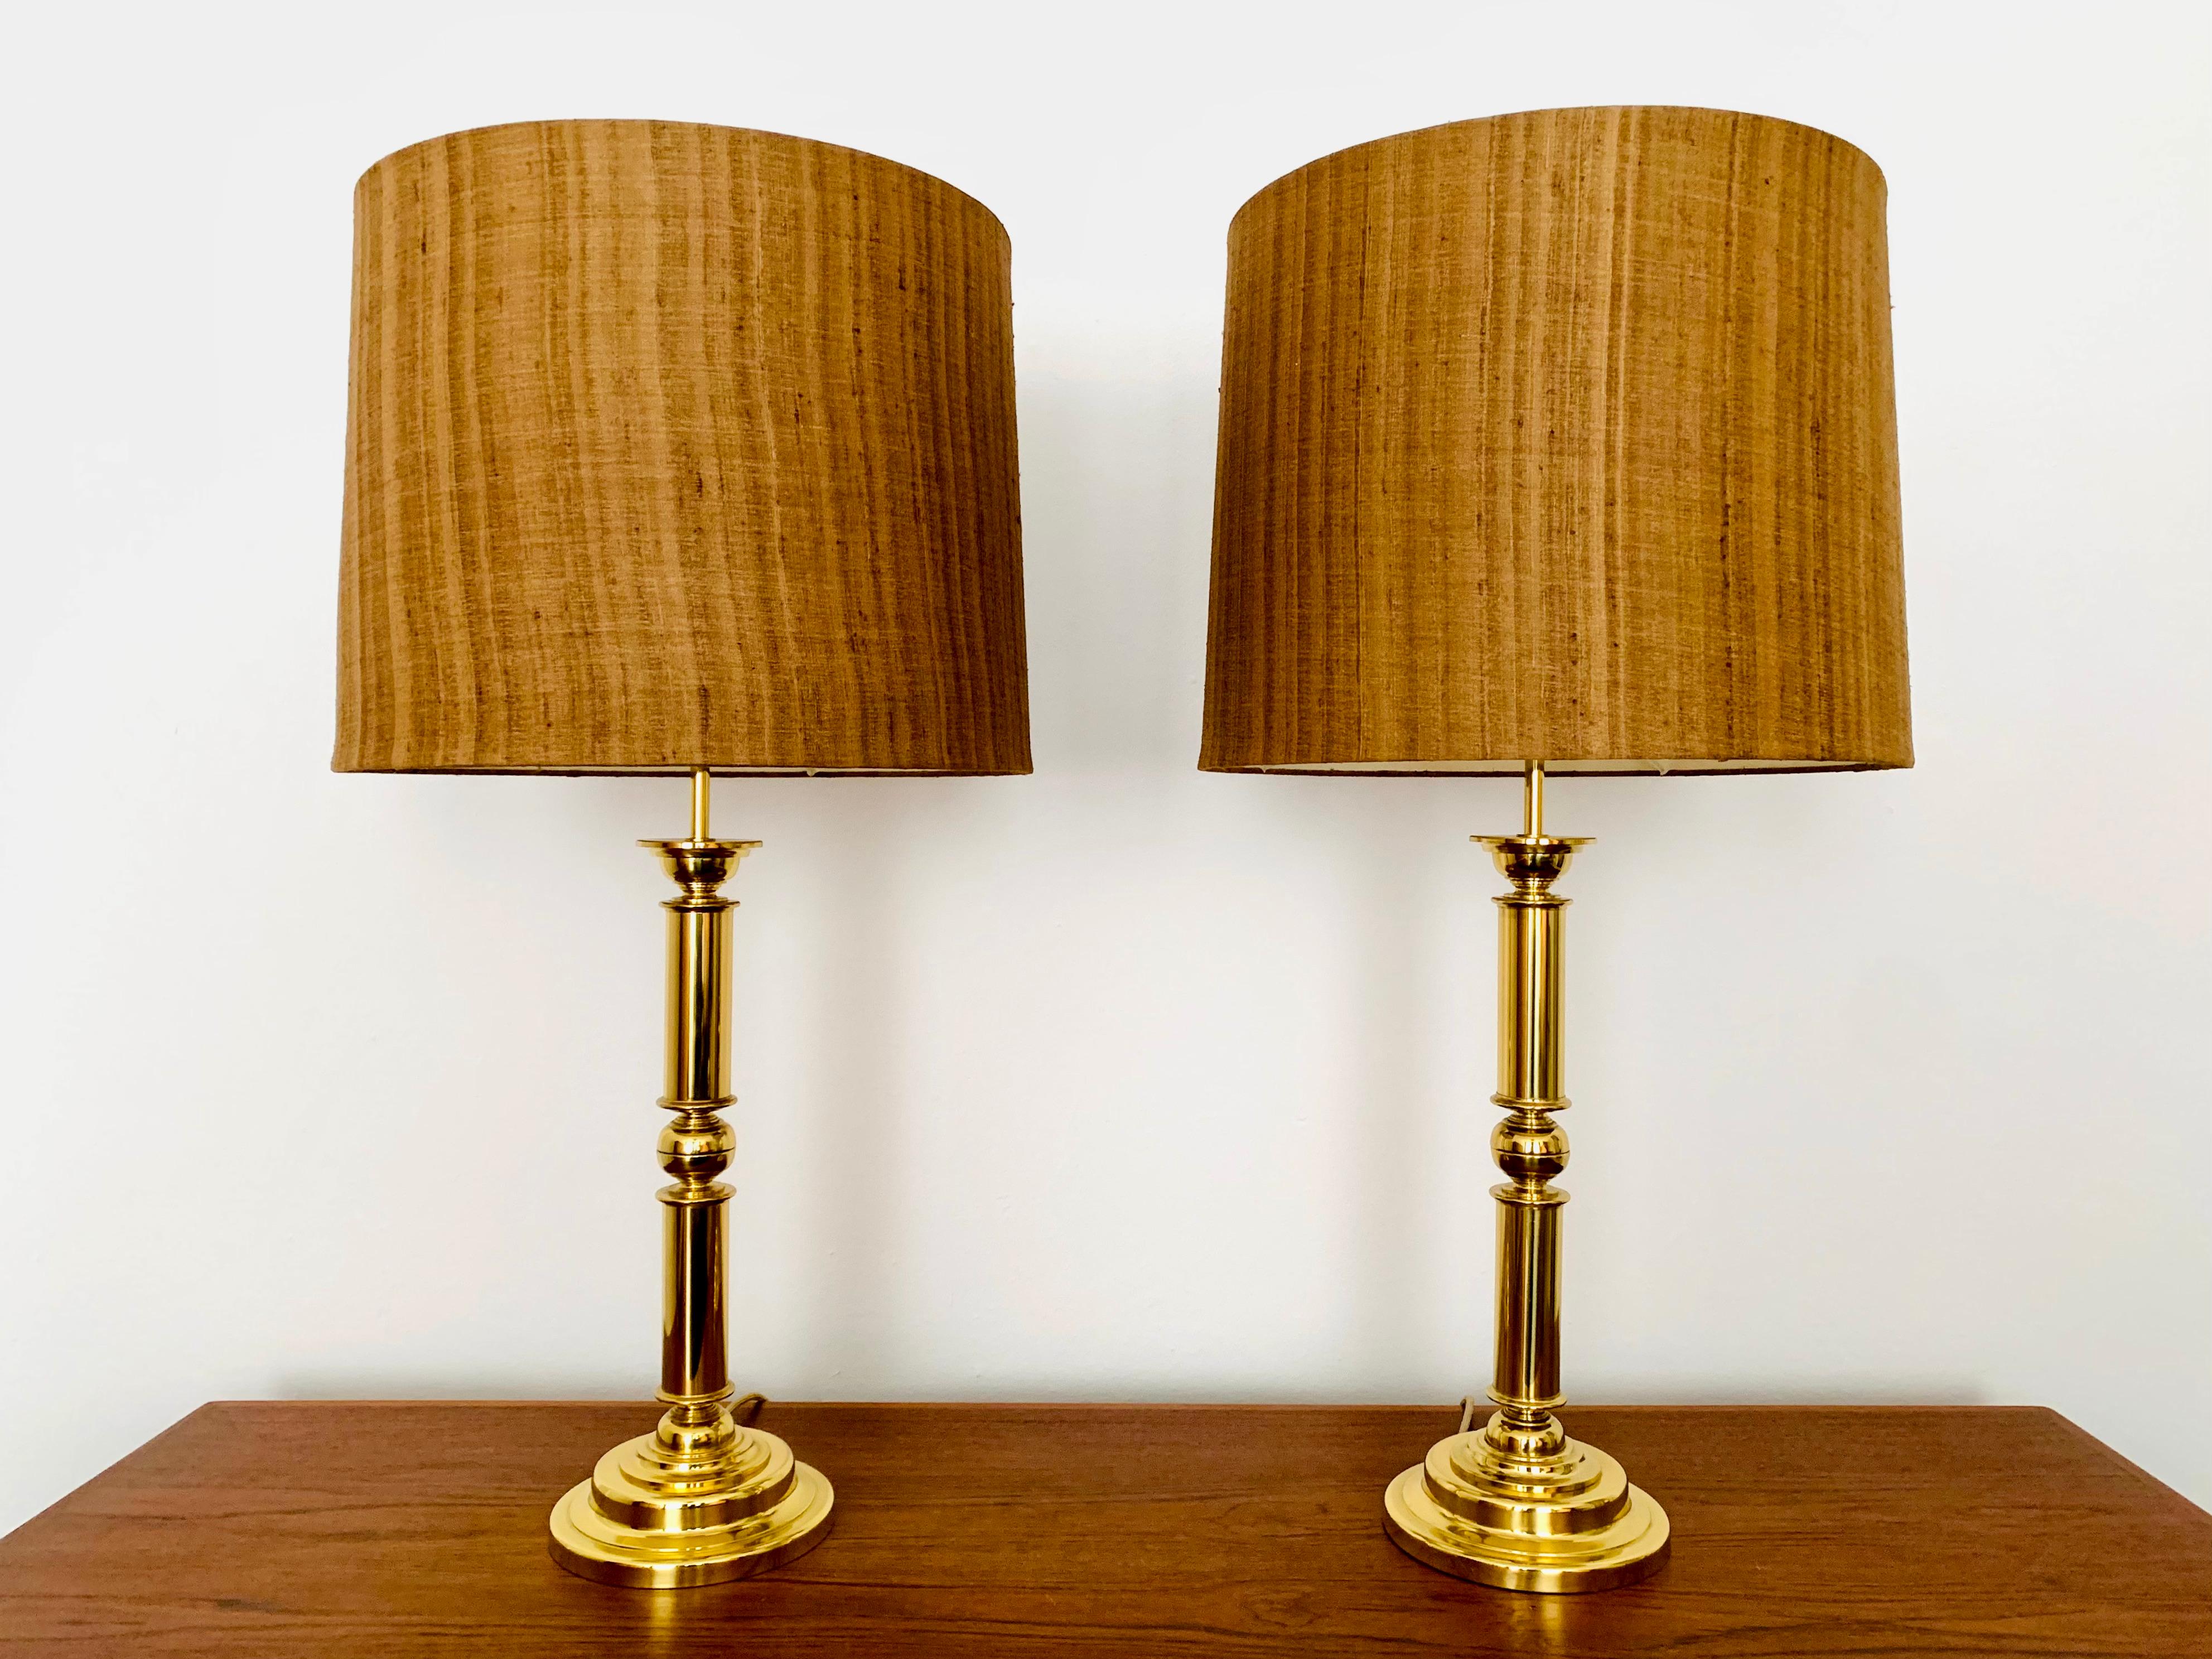 Impressive pair of brass table lamps from the 1960s.
Extraordinarily successful design and very high-quality German workmanship.
The beautiful structure in the lampshades creates a pleasant and cozy lighting atmosphere.

Manufacturer: Vereinigte